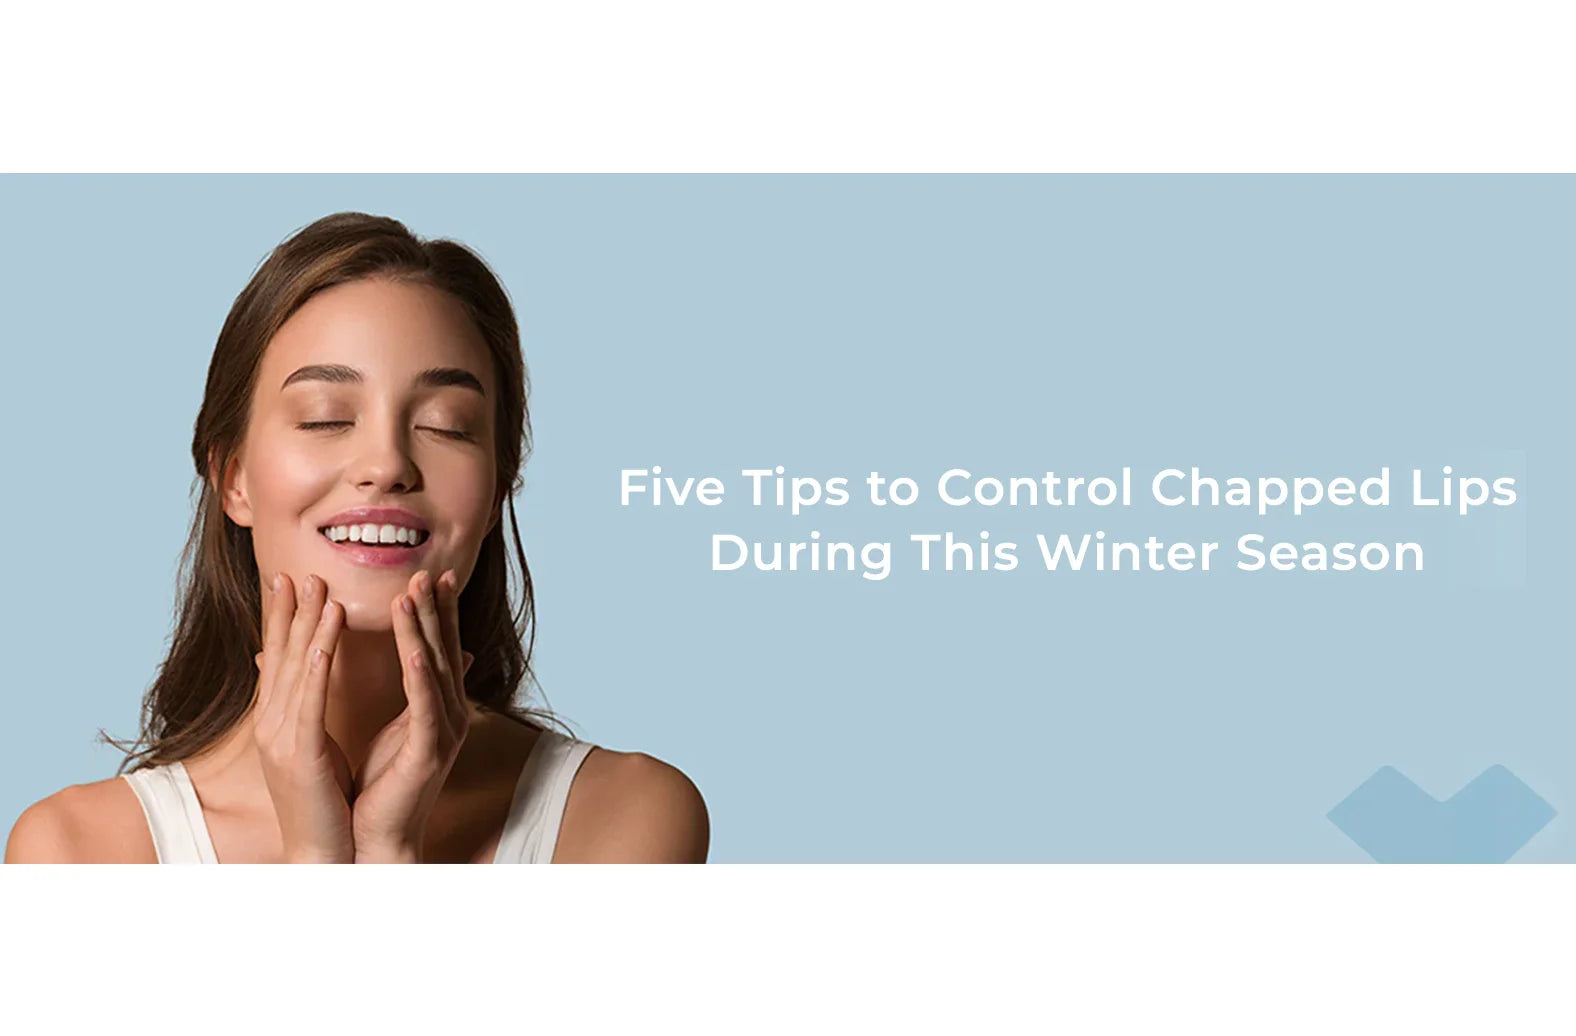 5 tips to control chapped lips during this winter season